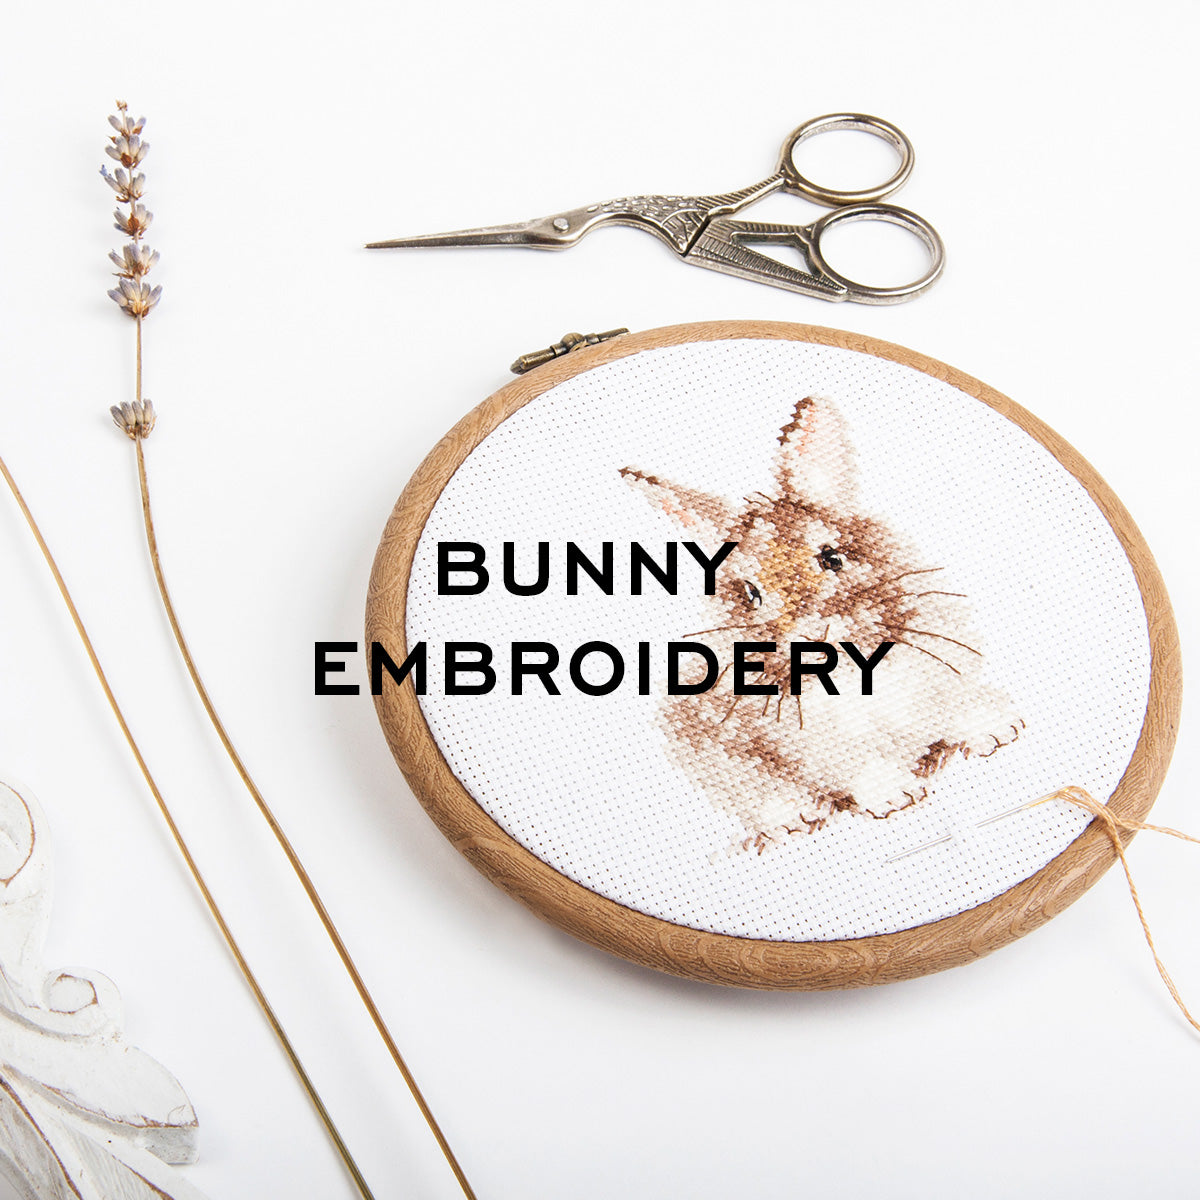 Bunny embroidery